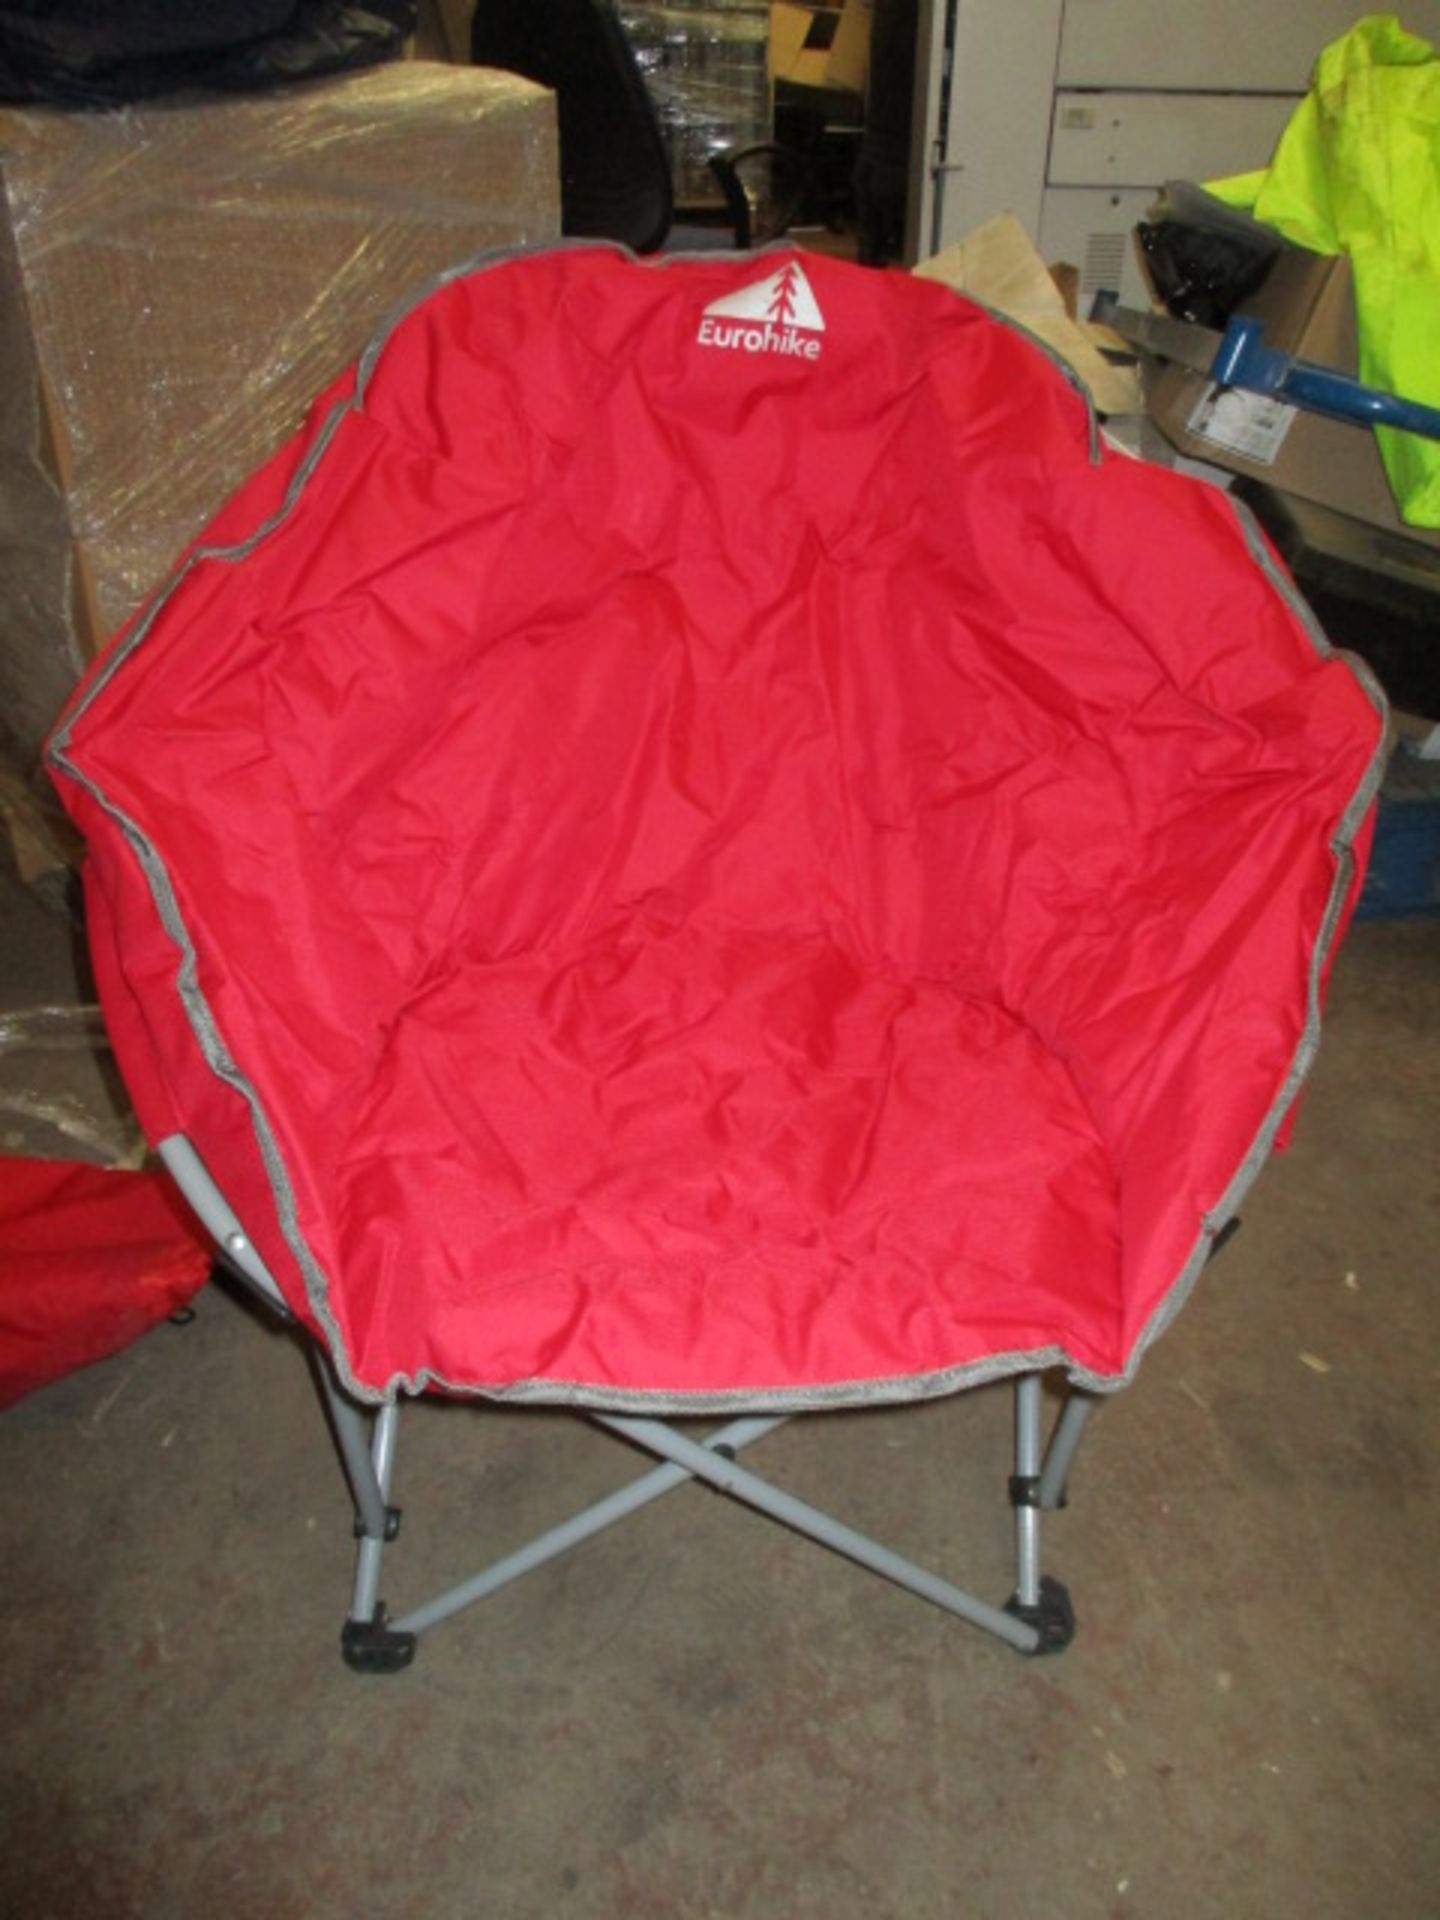 Eurohike DLX Moon Chair With Carry Bag